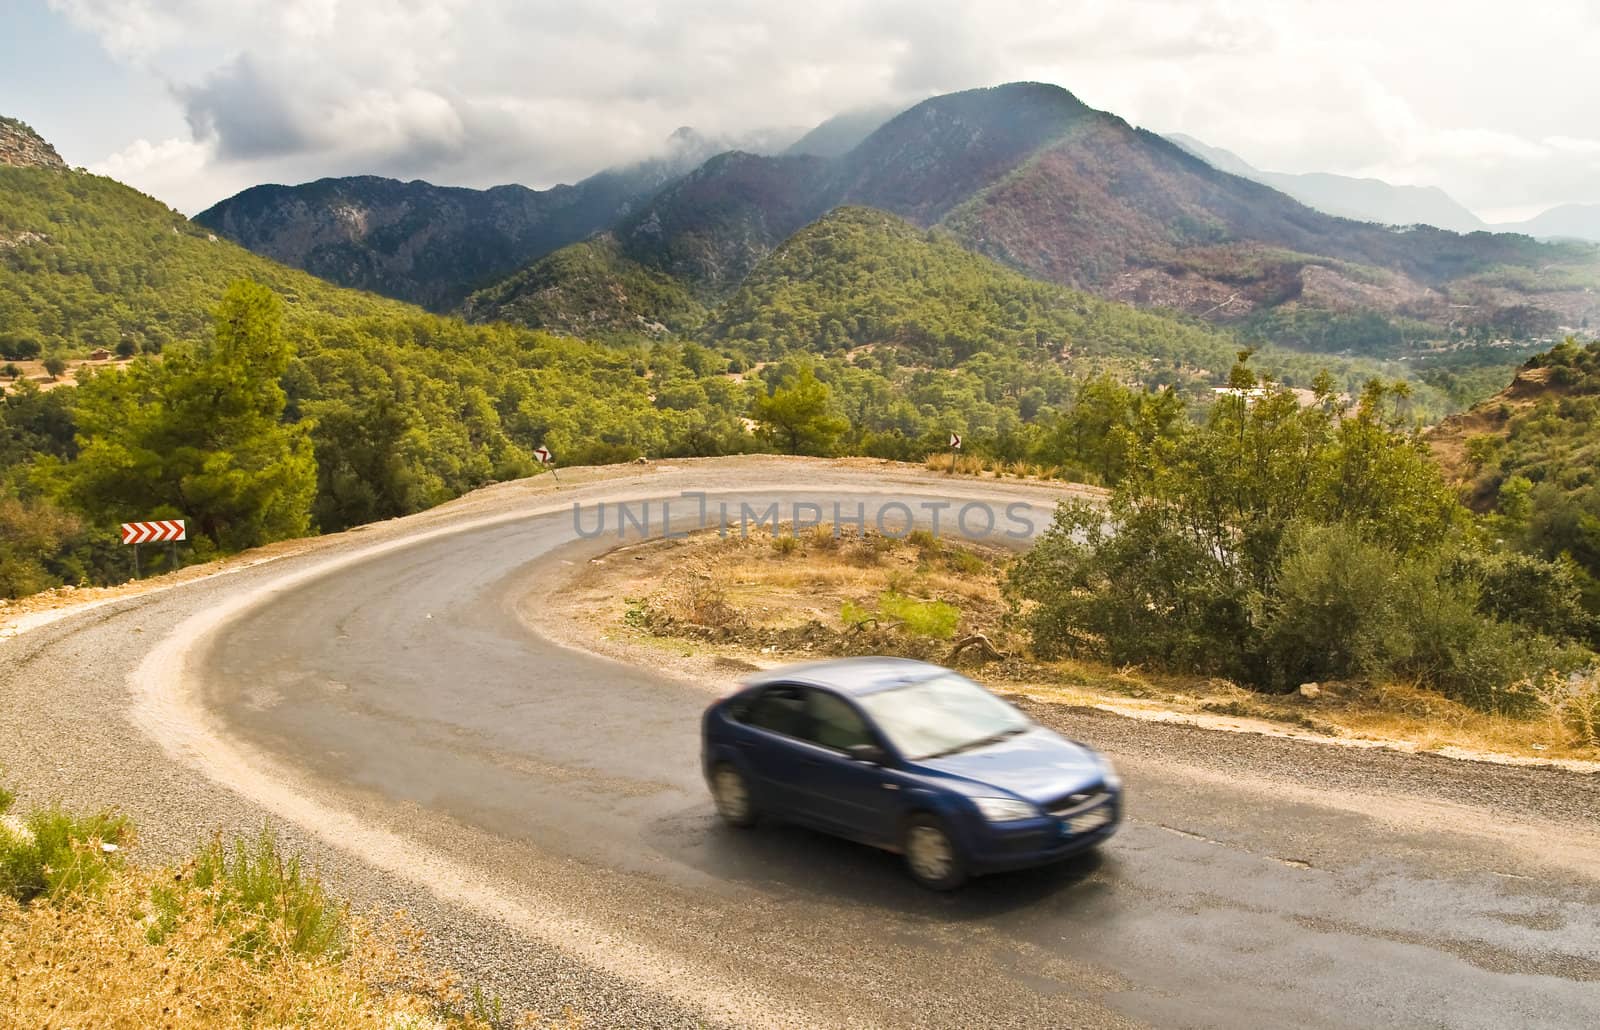 Dark blue car goes up the serpentine road in mountains in cloudy weather